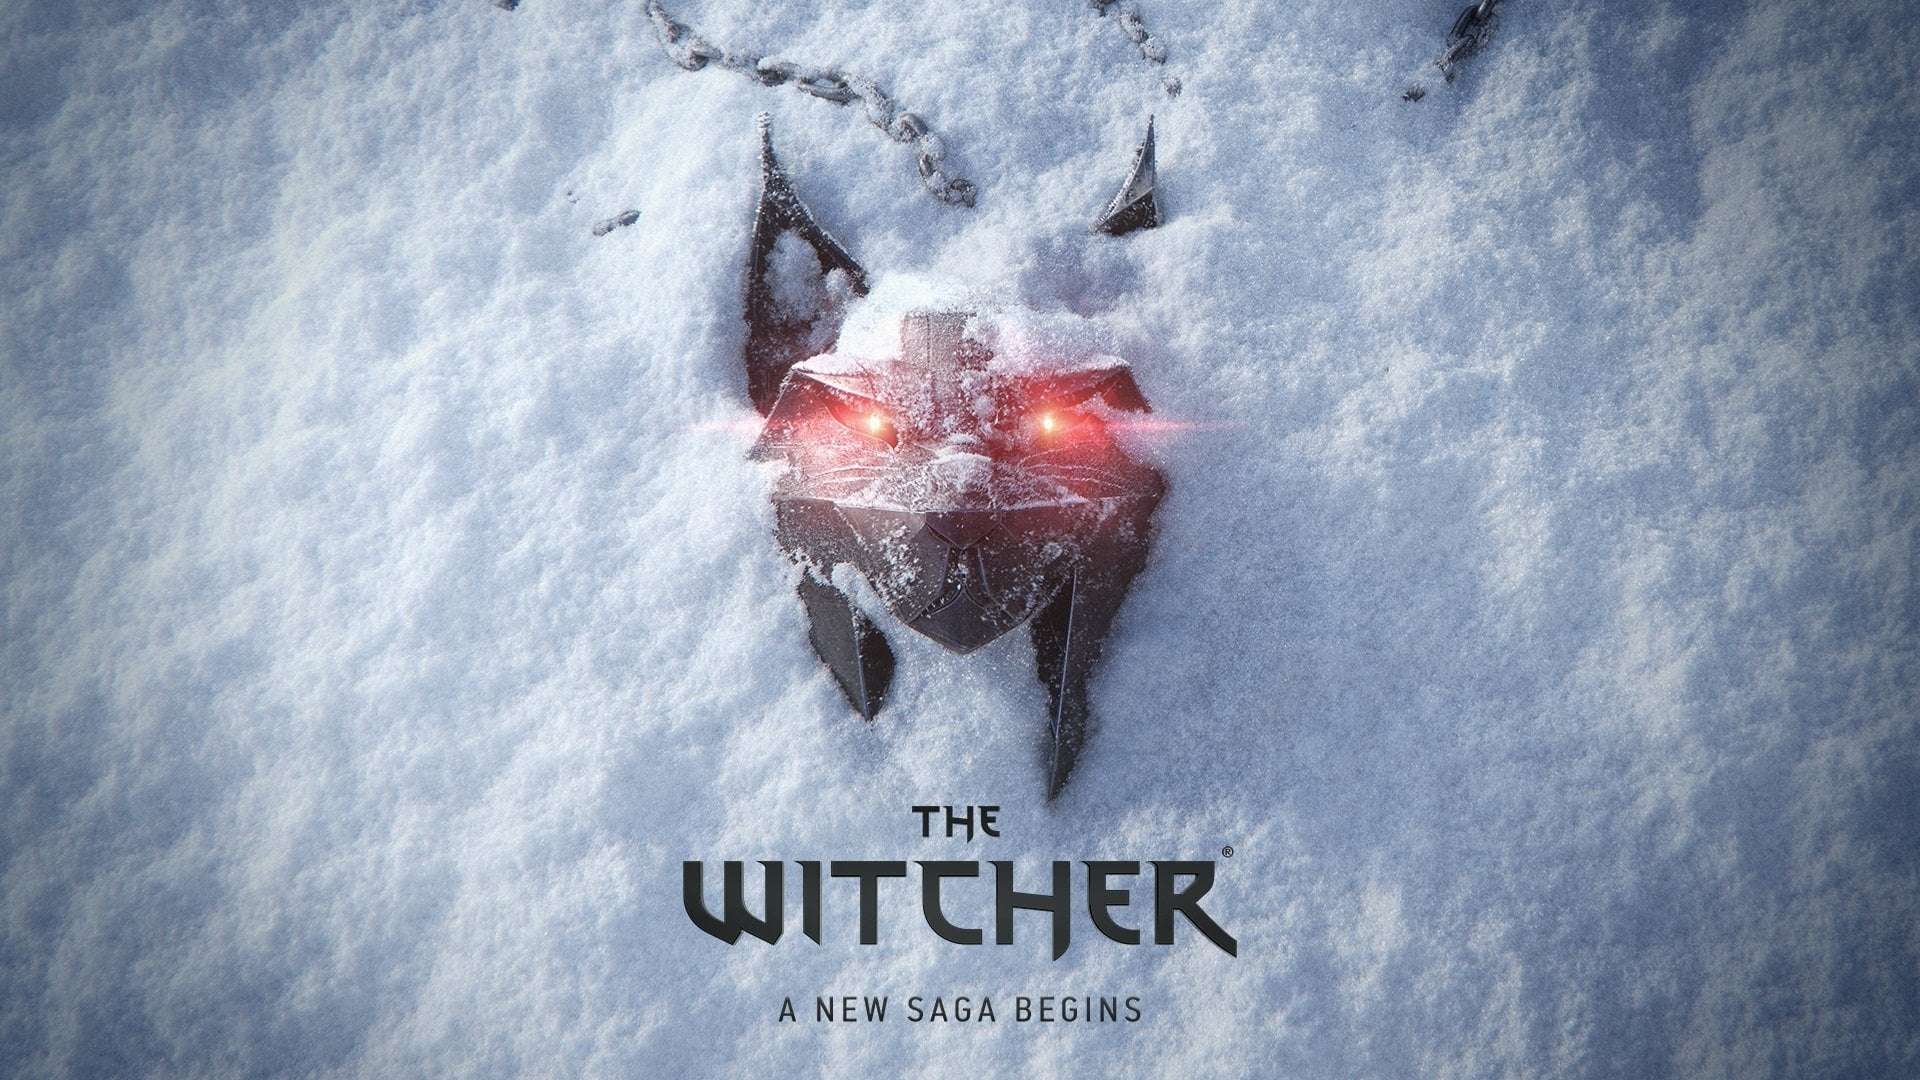 image for Two thirds of CD Projekt developers are now working on The Witcher 4, reaching its target staff size